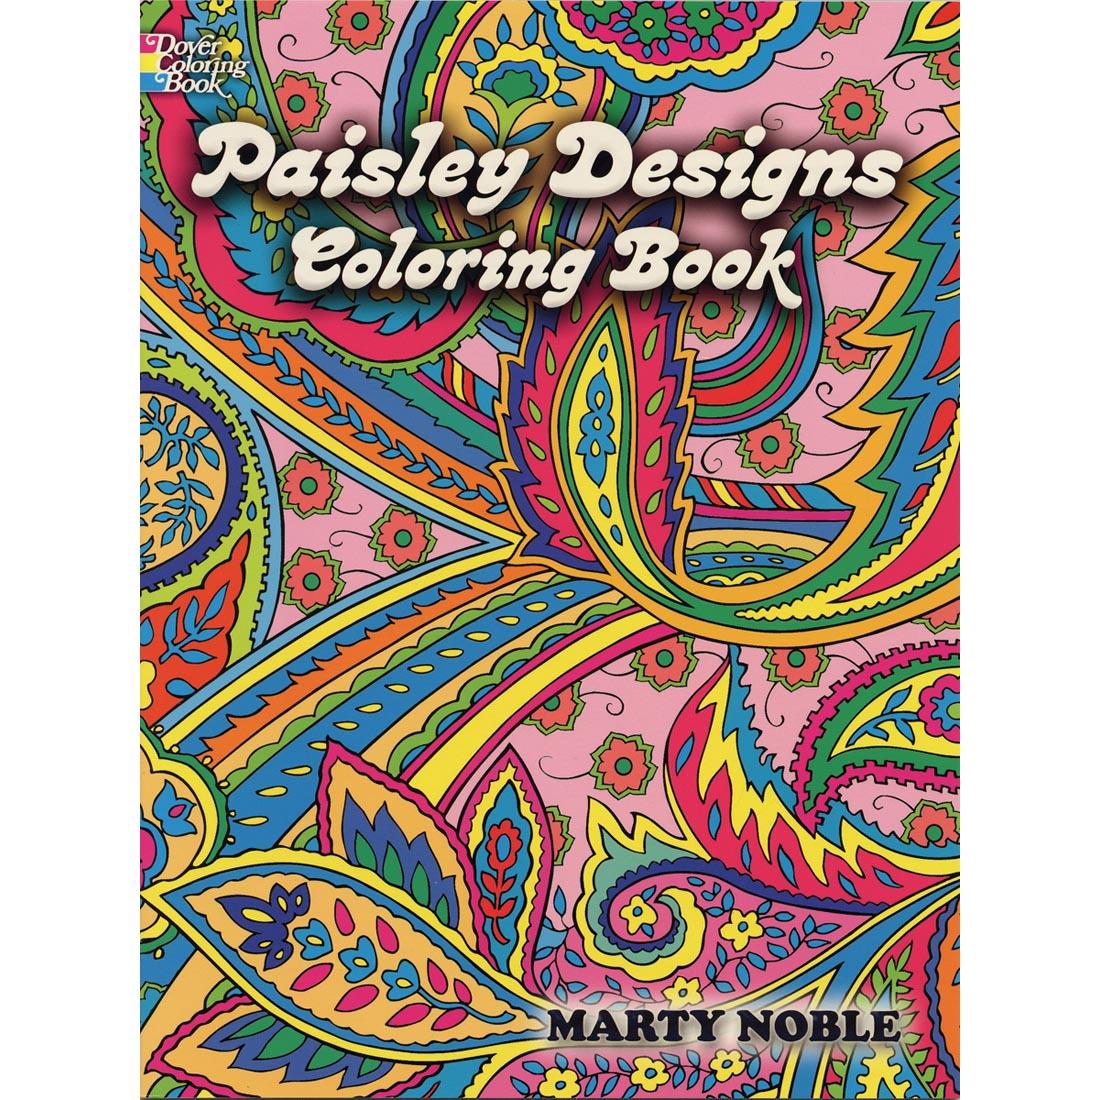 Paisley Designs Coloring Book by Dover